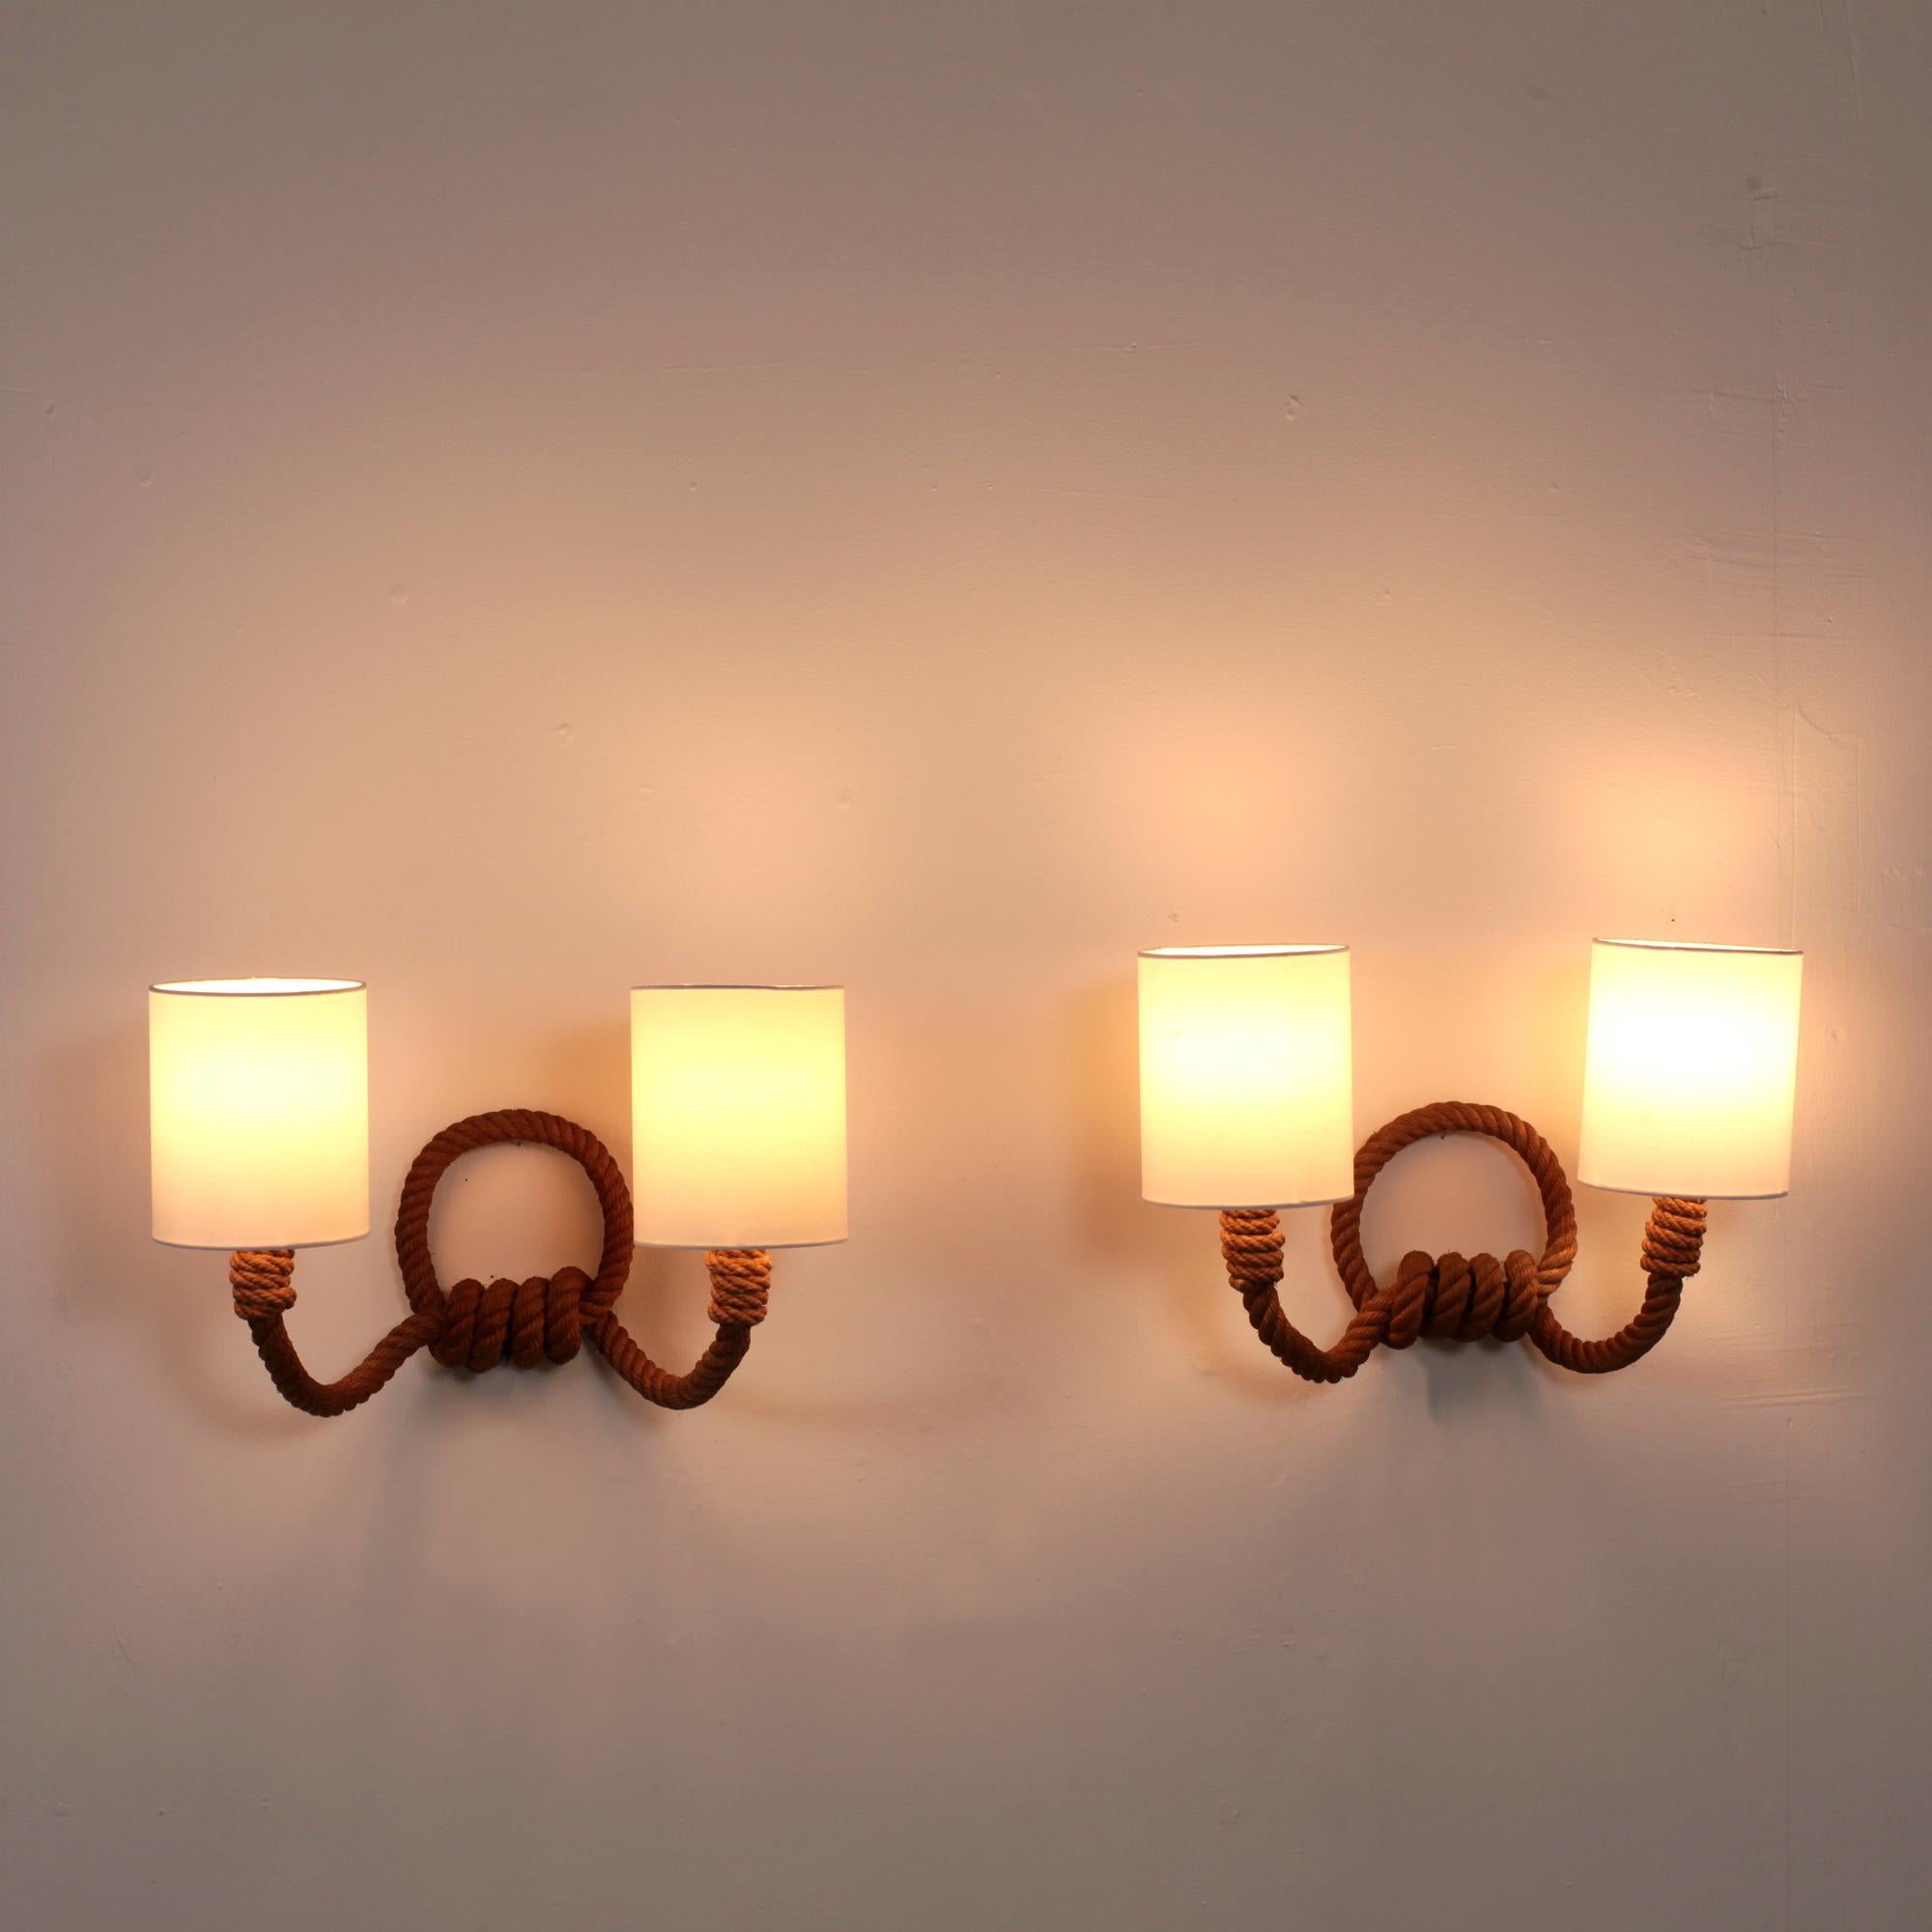 Nice original Adrien Audoux and Frida Minet pair of rope wall sconces, France, 1950.
2 lights per wall lamp
Original B22 socket with switch on each
Dimensions with Lampshade:
Depth 18 cm - Width 40 cm - Height 37 cm
Good original vintage condition.